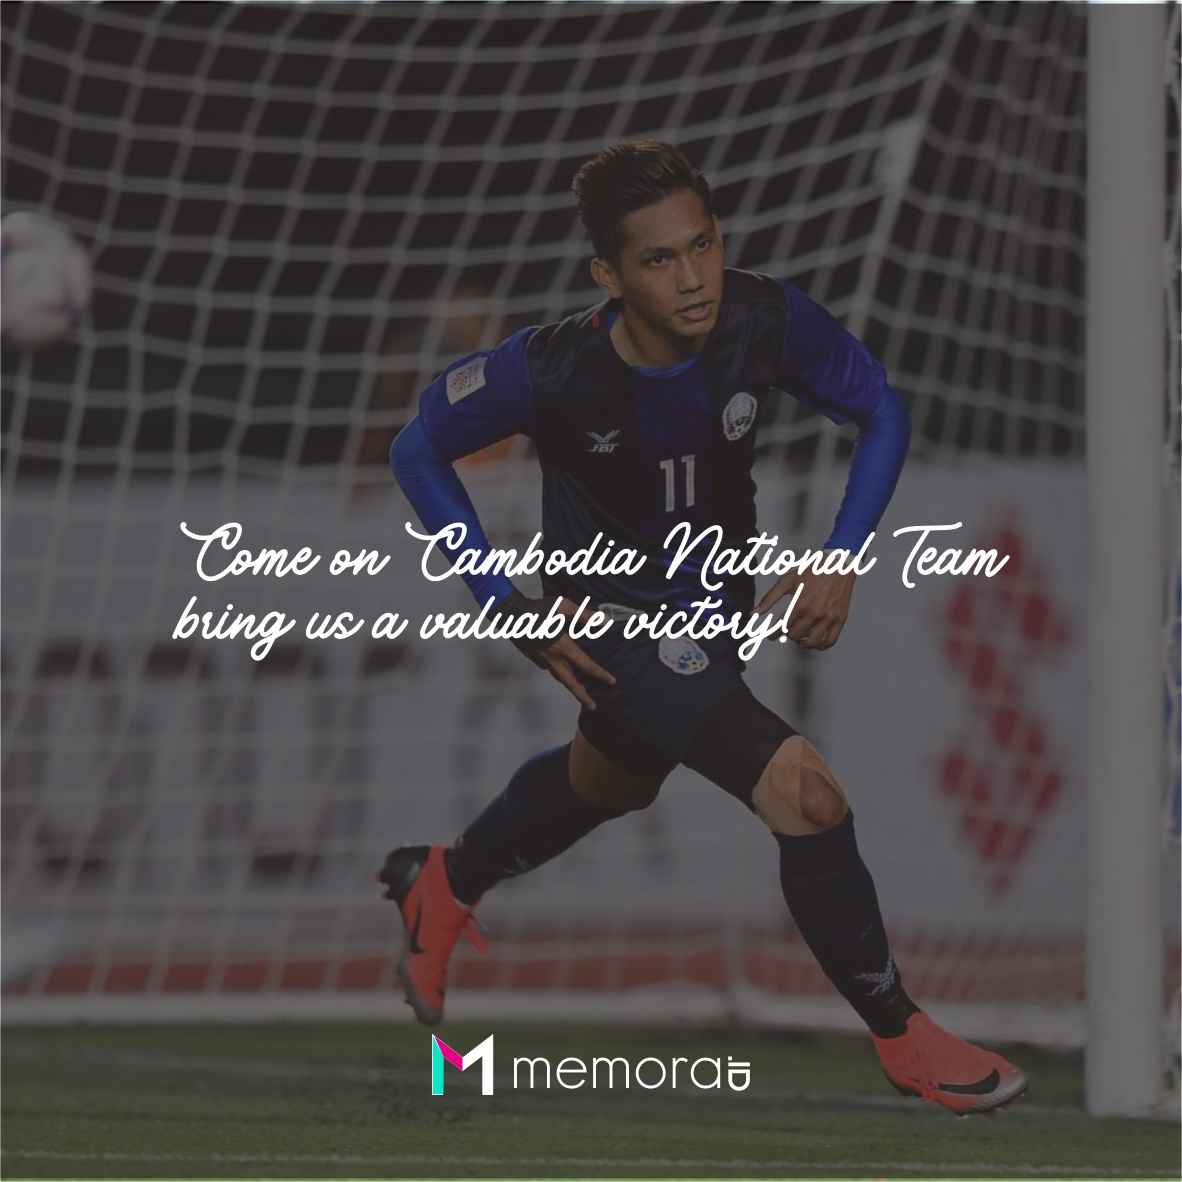 Quotes for Cambodia National Team